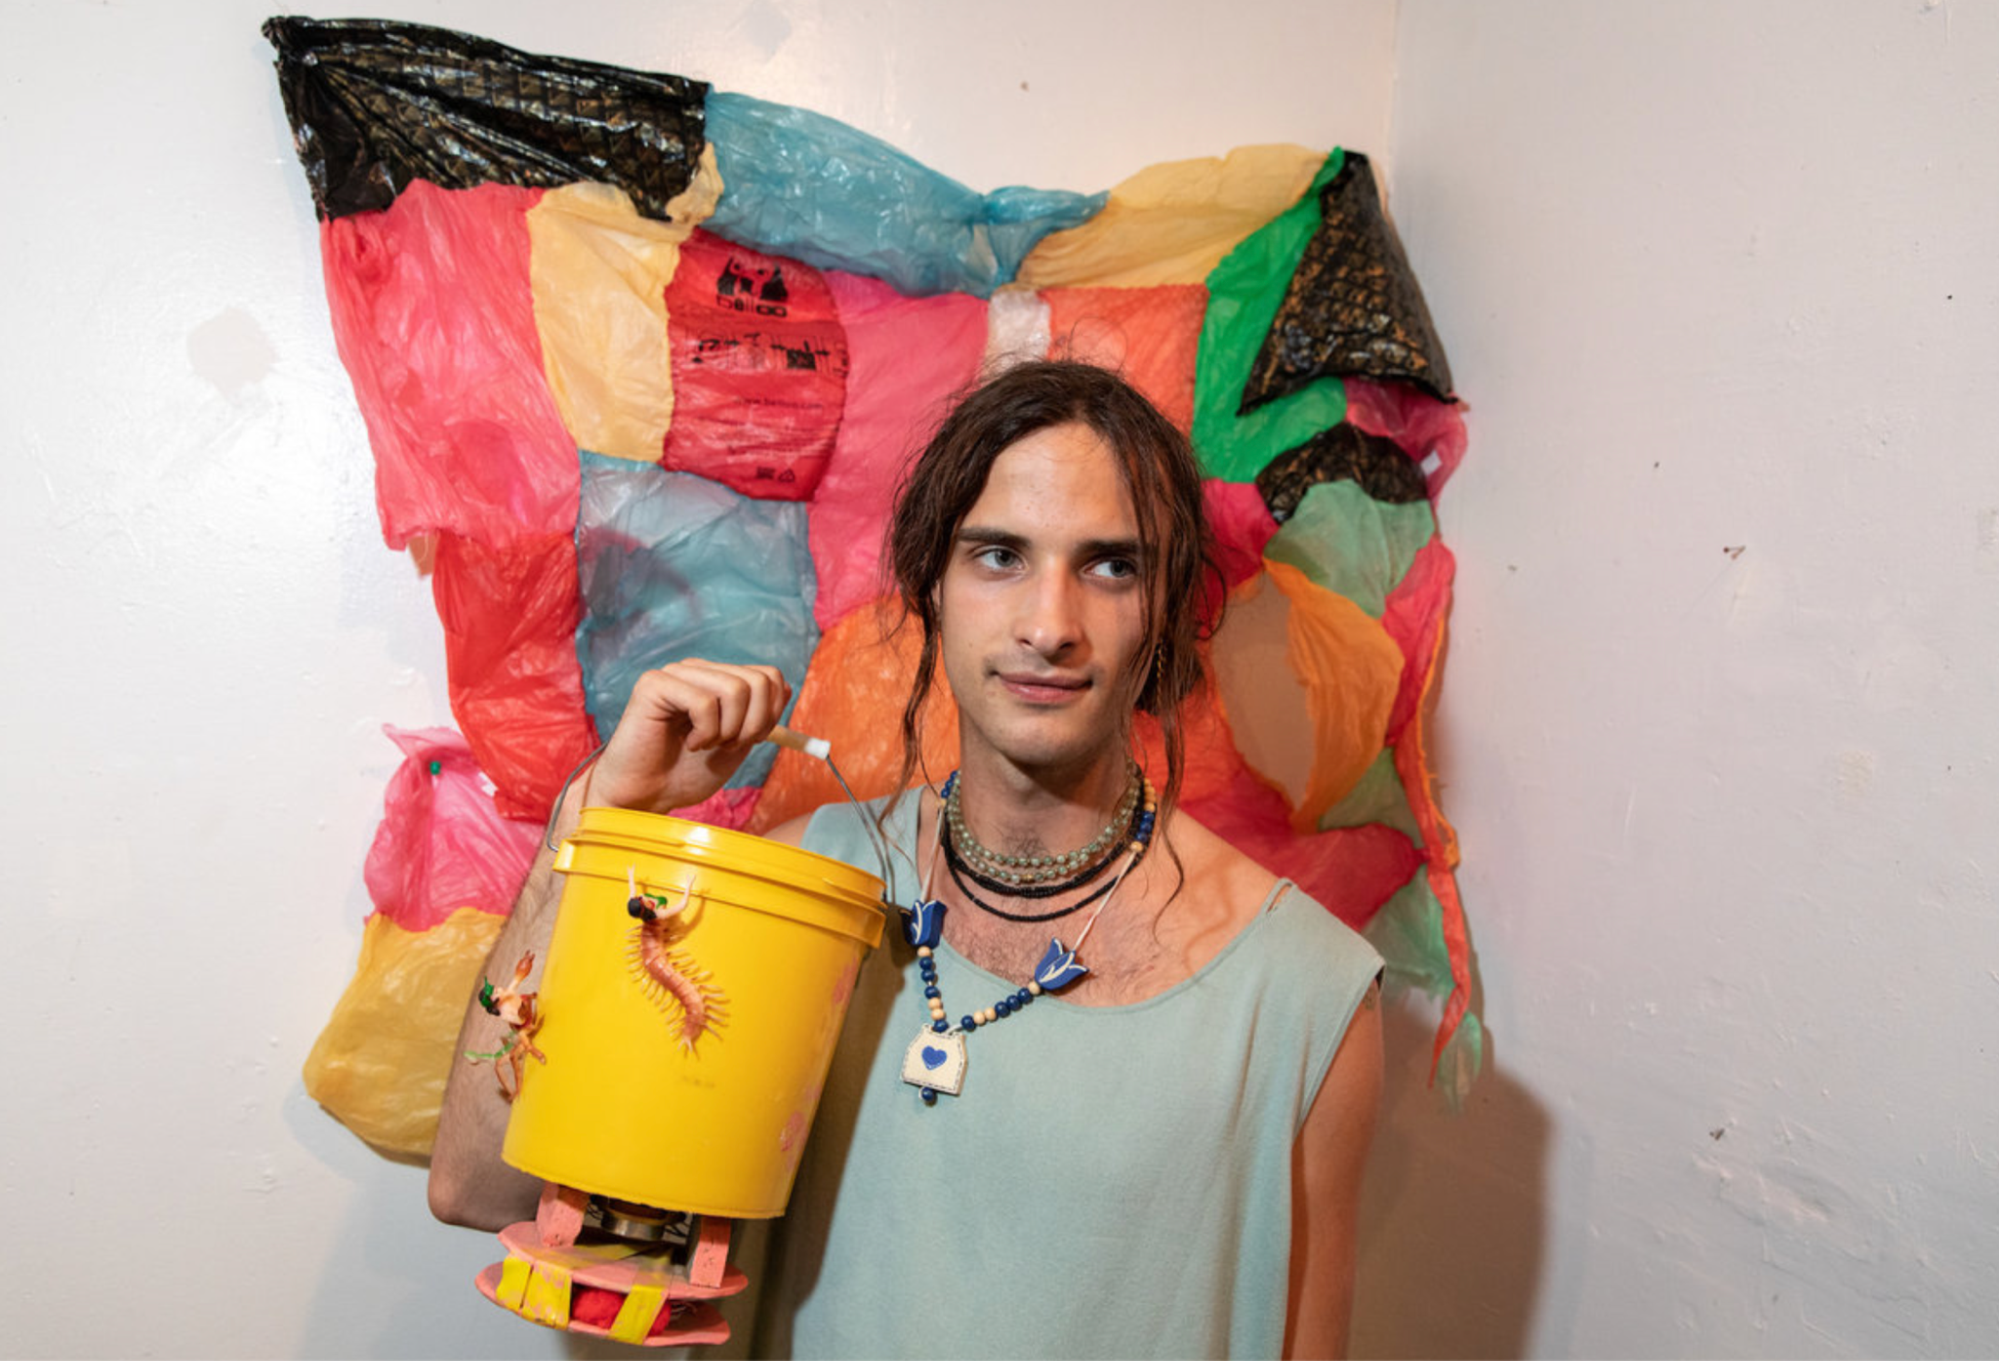 A person with long hair pulled back with strands hanging on either side of their face holds up a yellow bucket at chest level. Behind them is an artwork that looks like a multicolored patchwork quilt made of plastic bags.